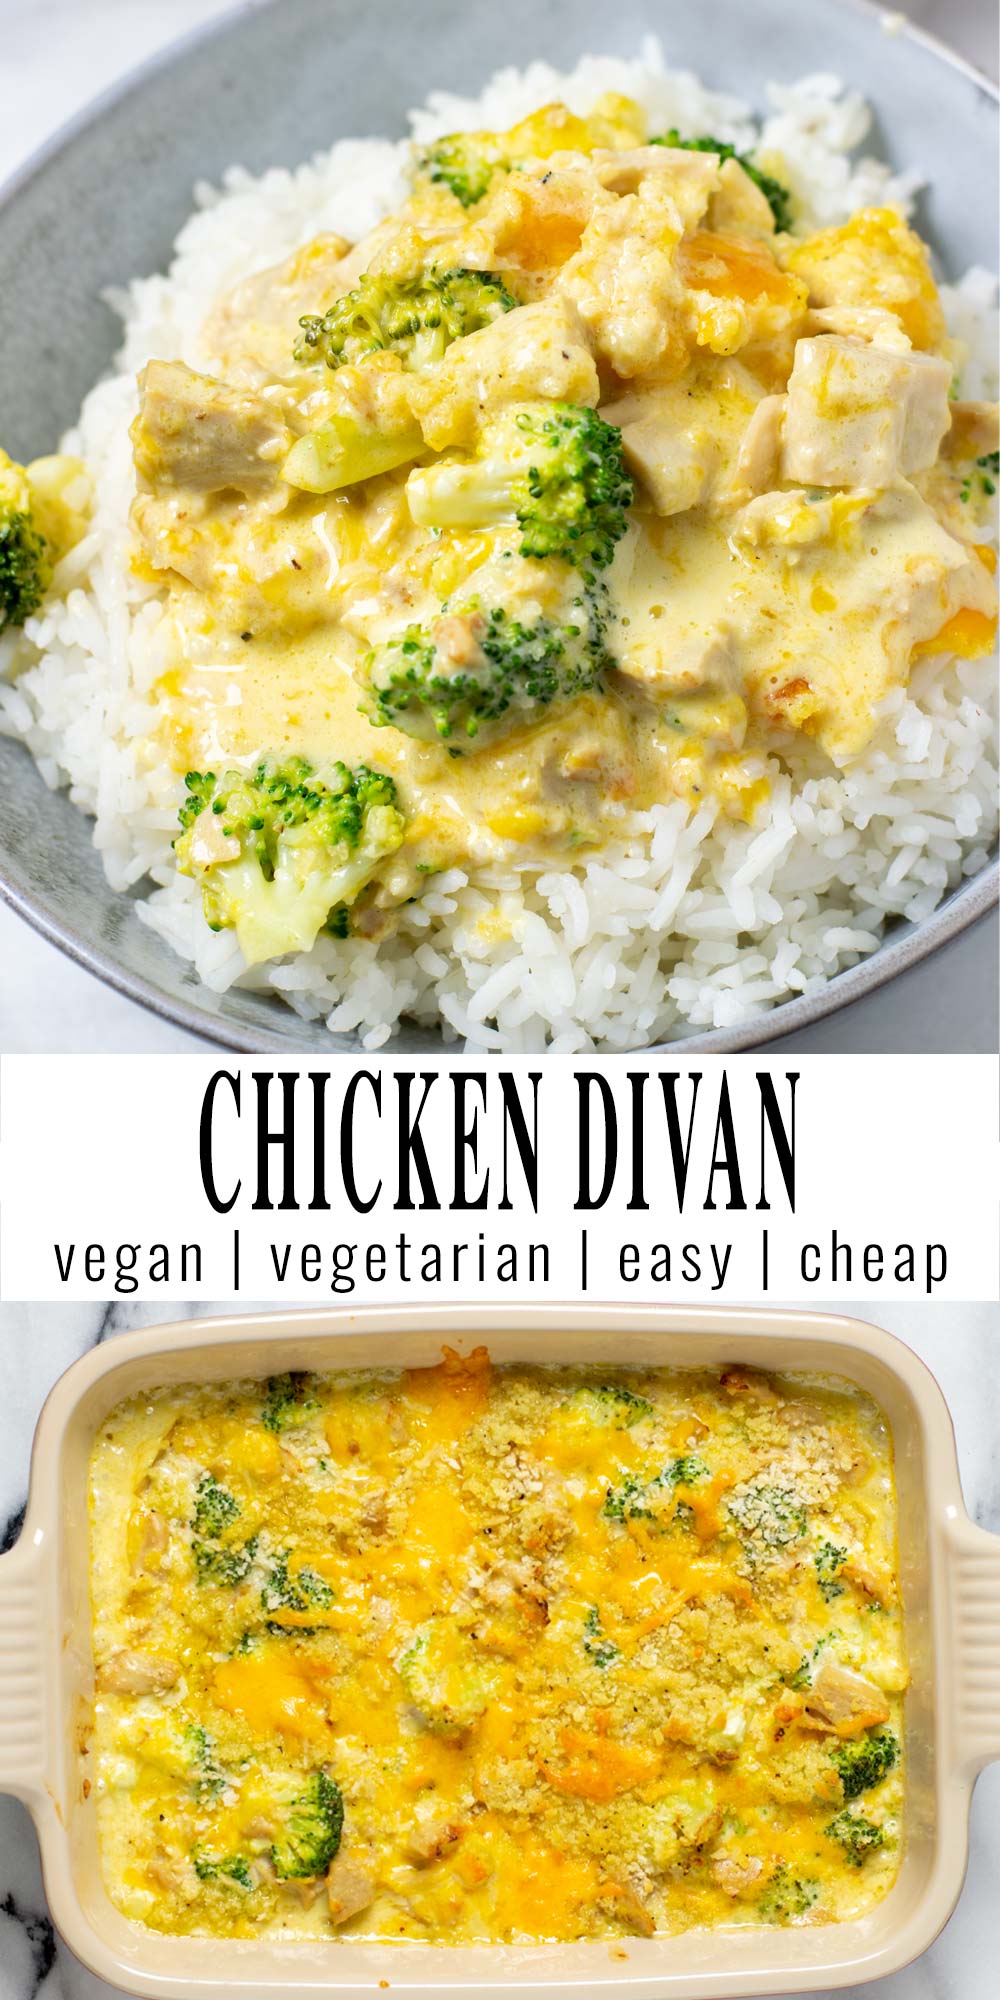 Collage of two pictures of the Chicken Divan with recipe title text.